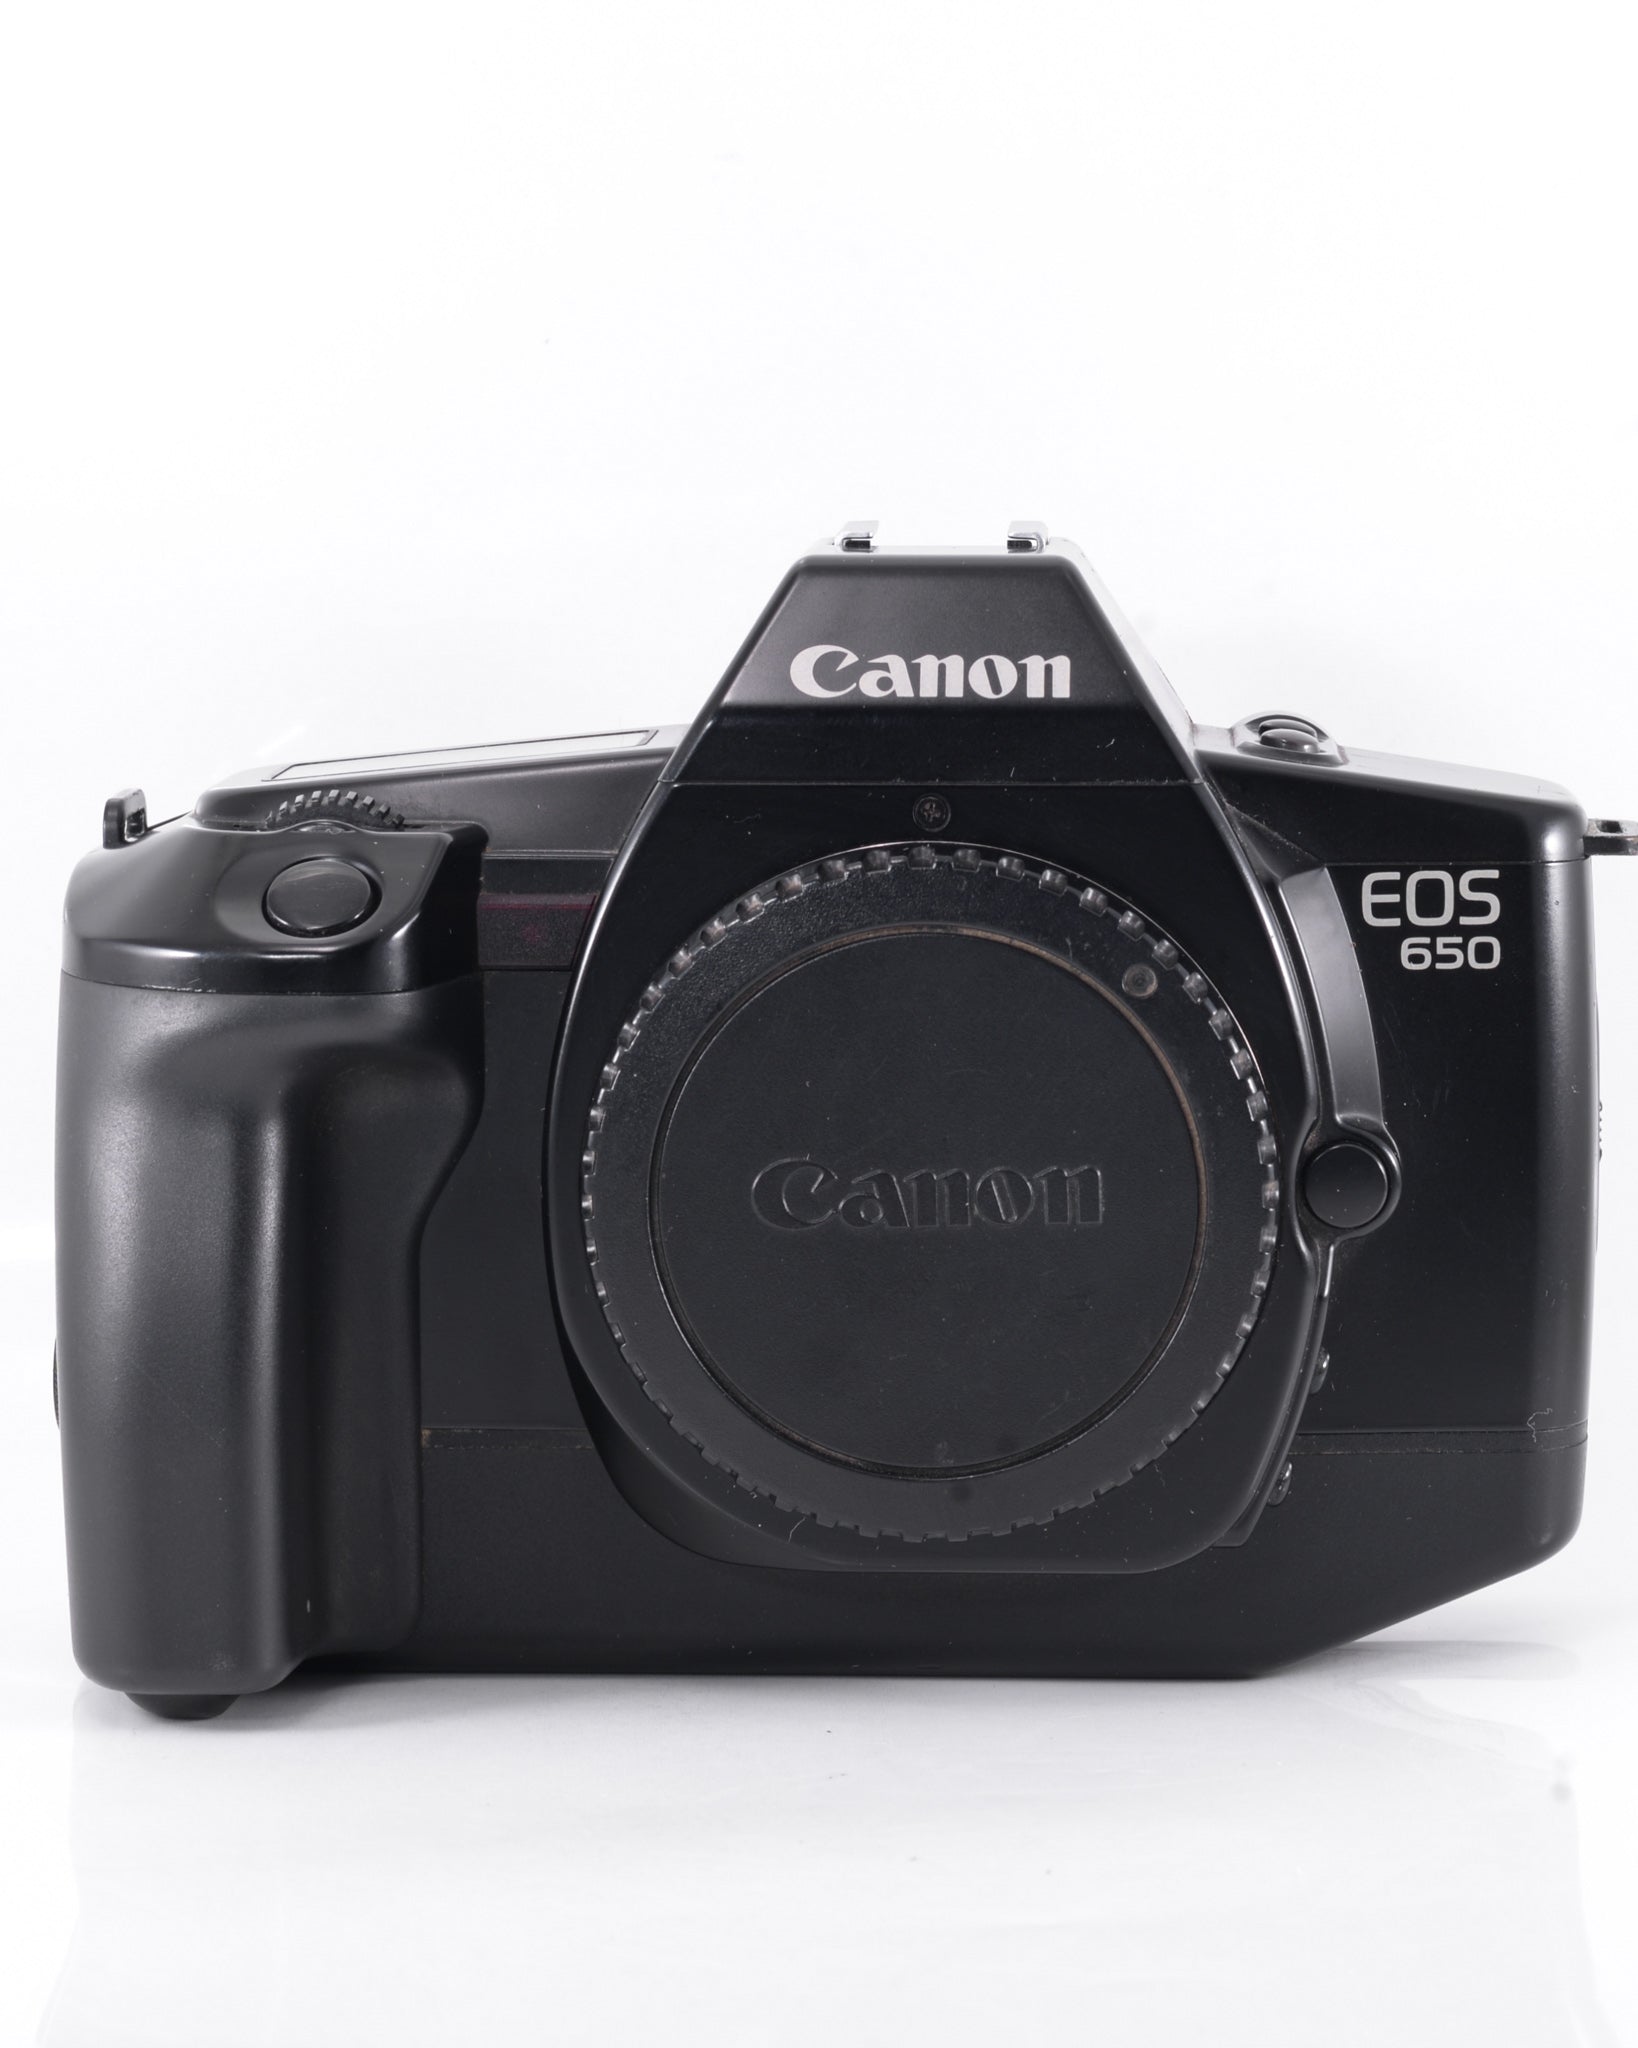 Canon EOS 650 35mm SLR Film Camera body only